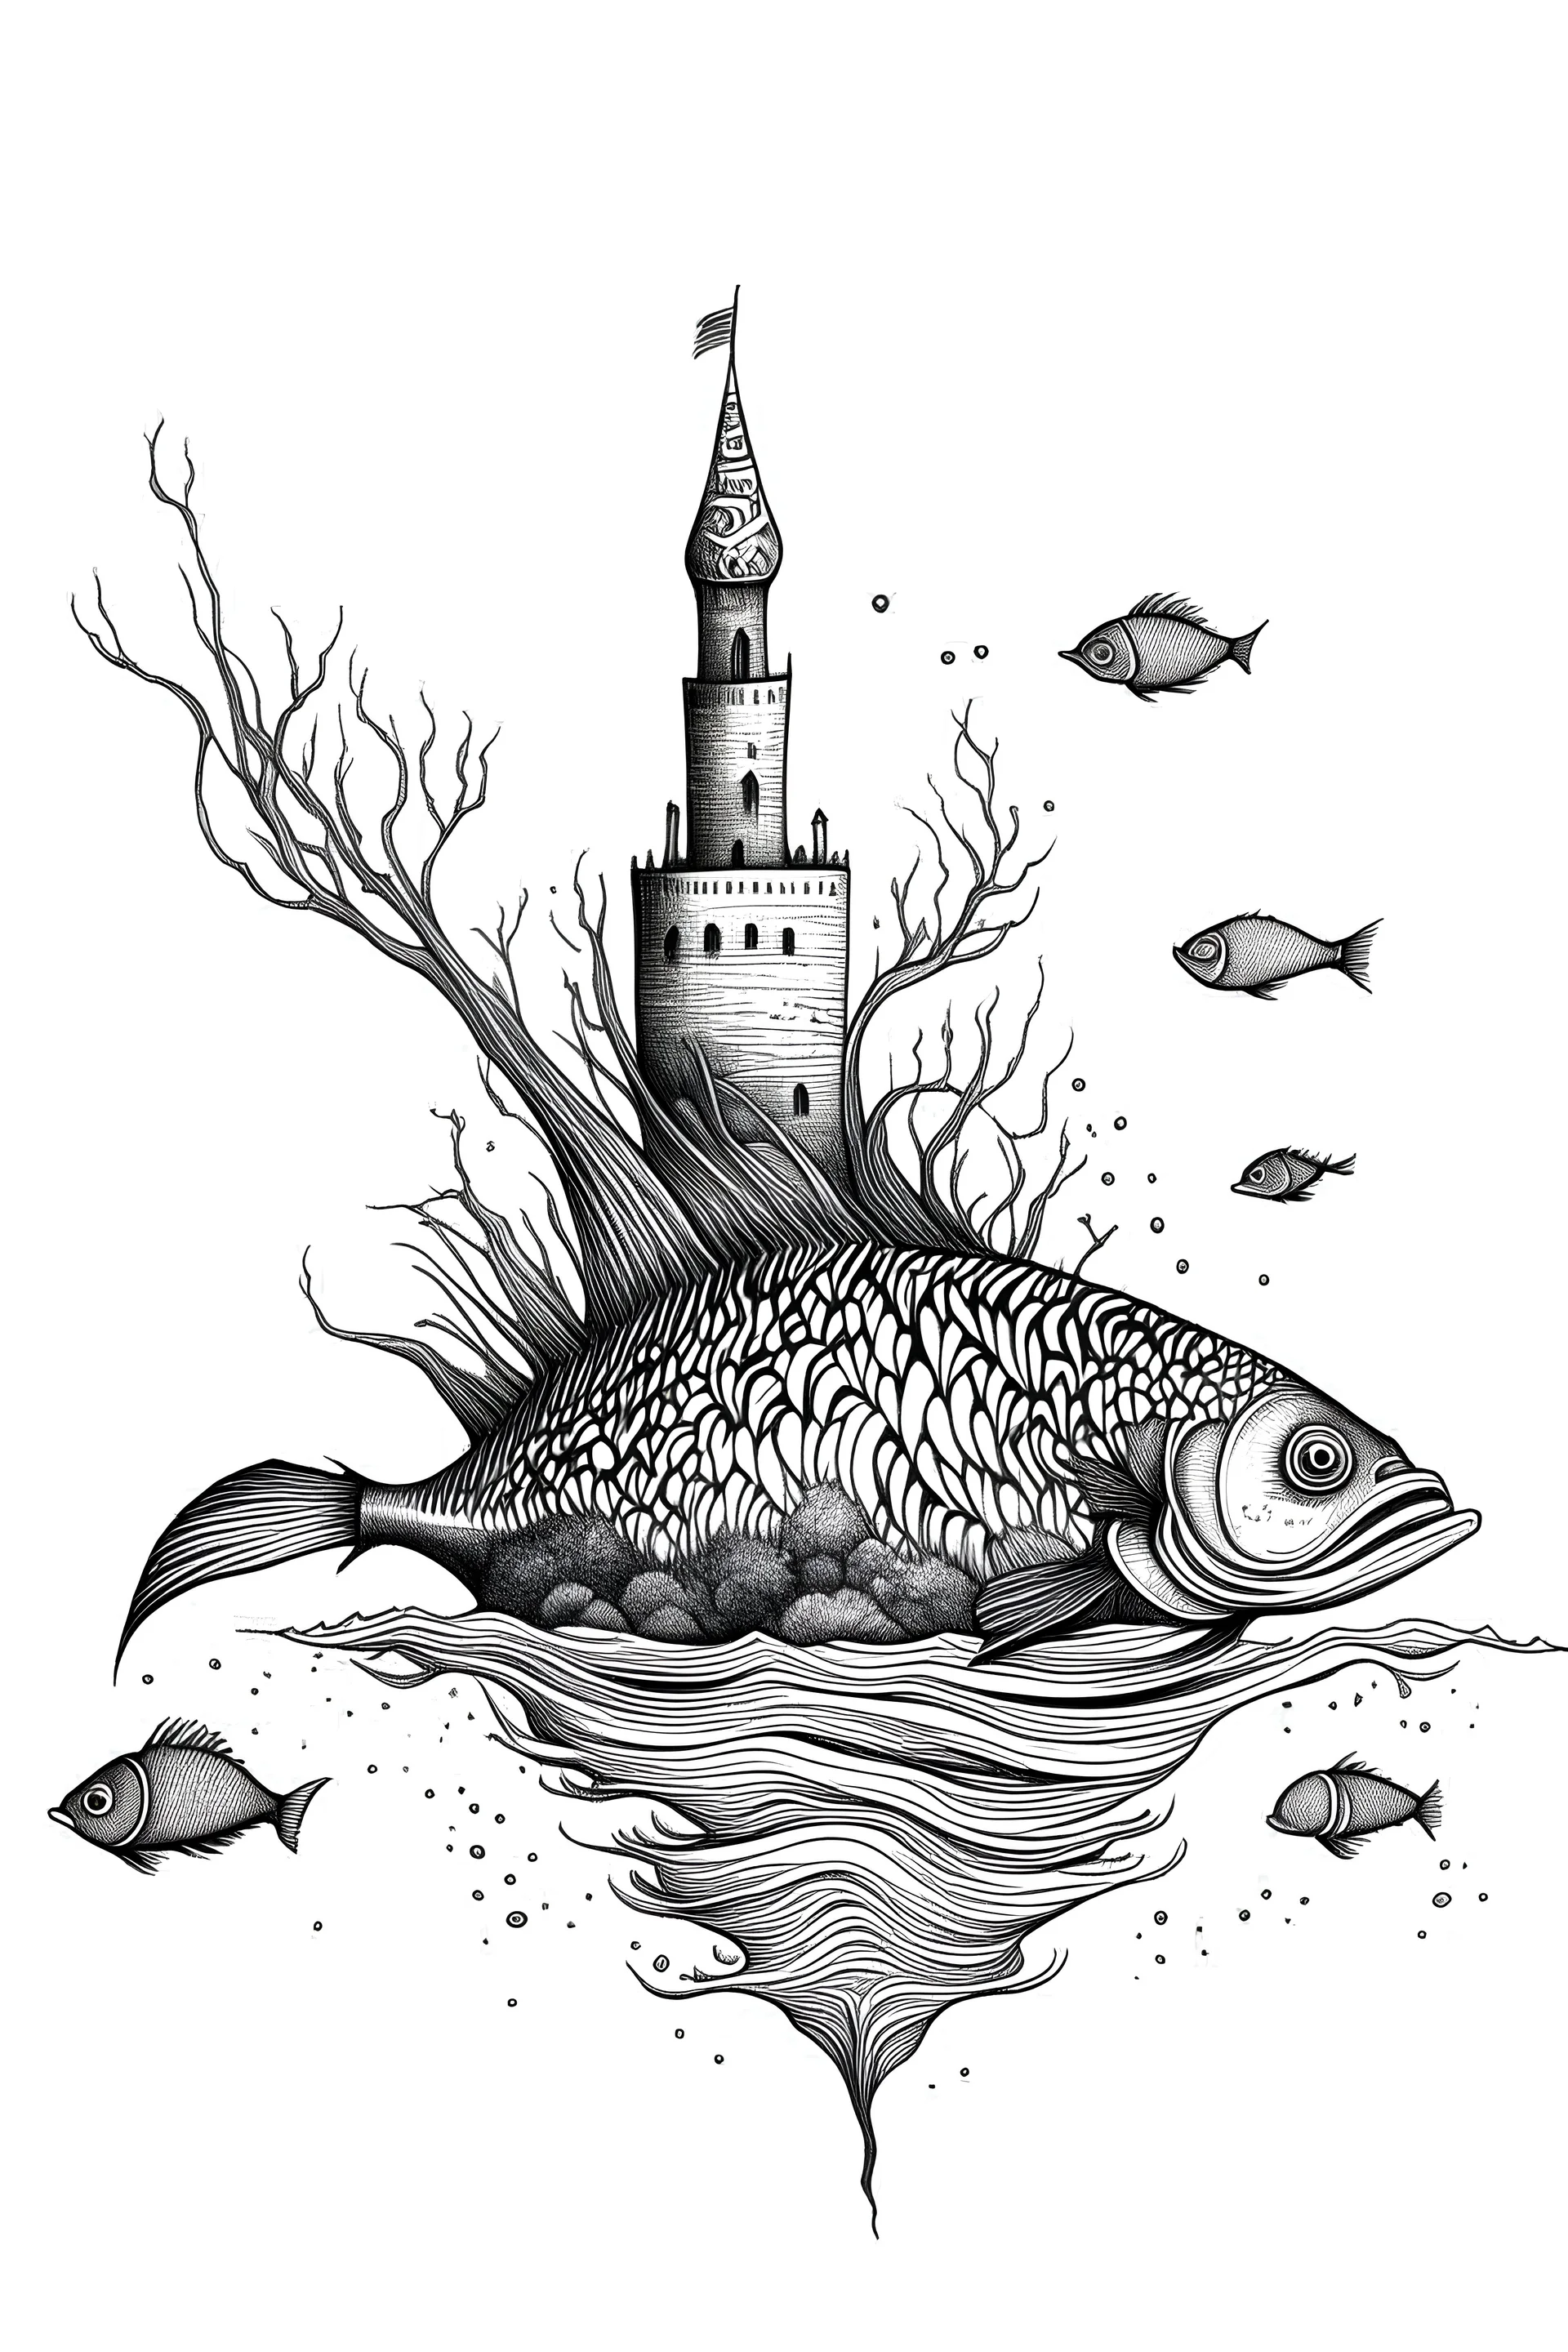 Fantastical, graceful fish with long fins and tail lurking in the deep sea, a small island floating above, surrealist ink drawing, black and white